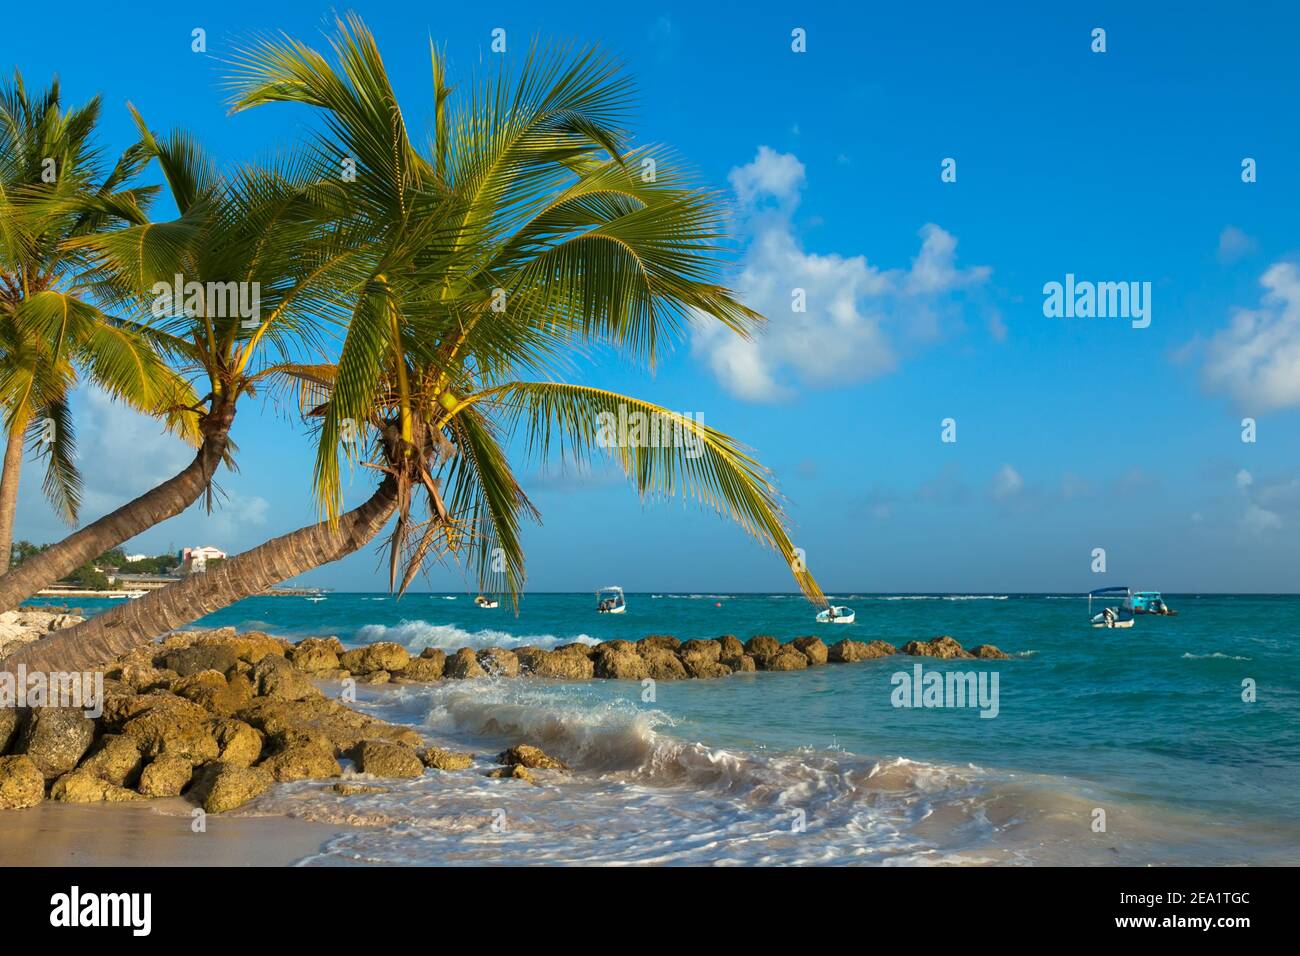 Worthing beach in Barbados. Beach with palm trees on ocean. leaning palm over the ocean Stock Photo